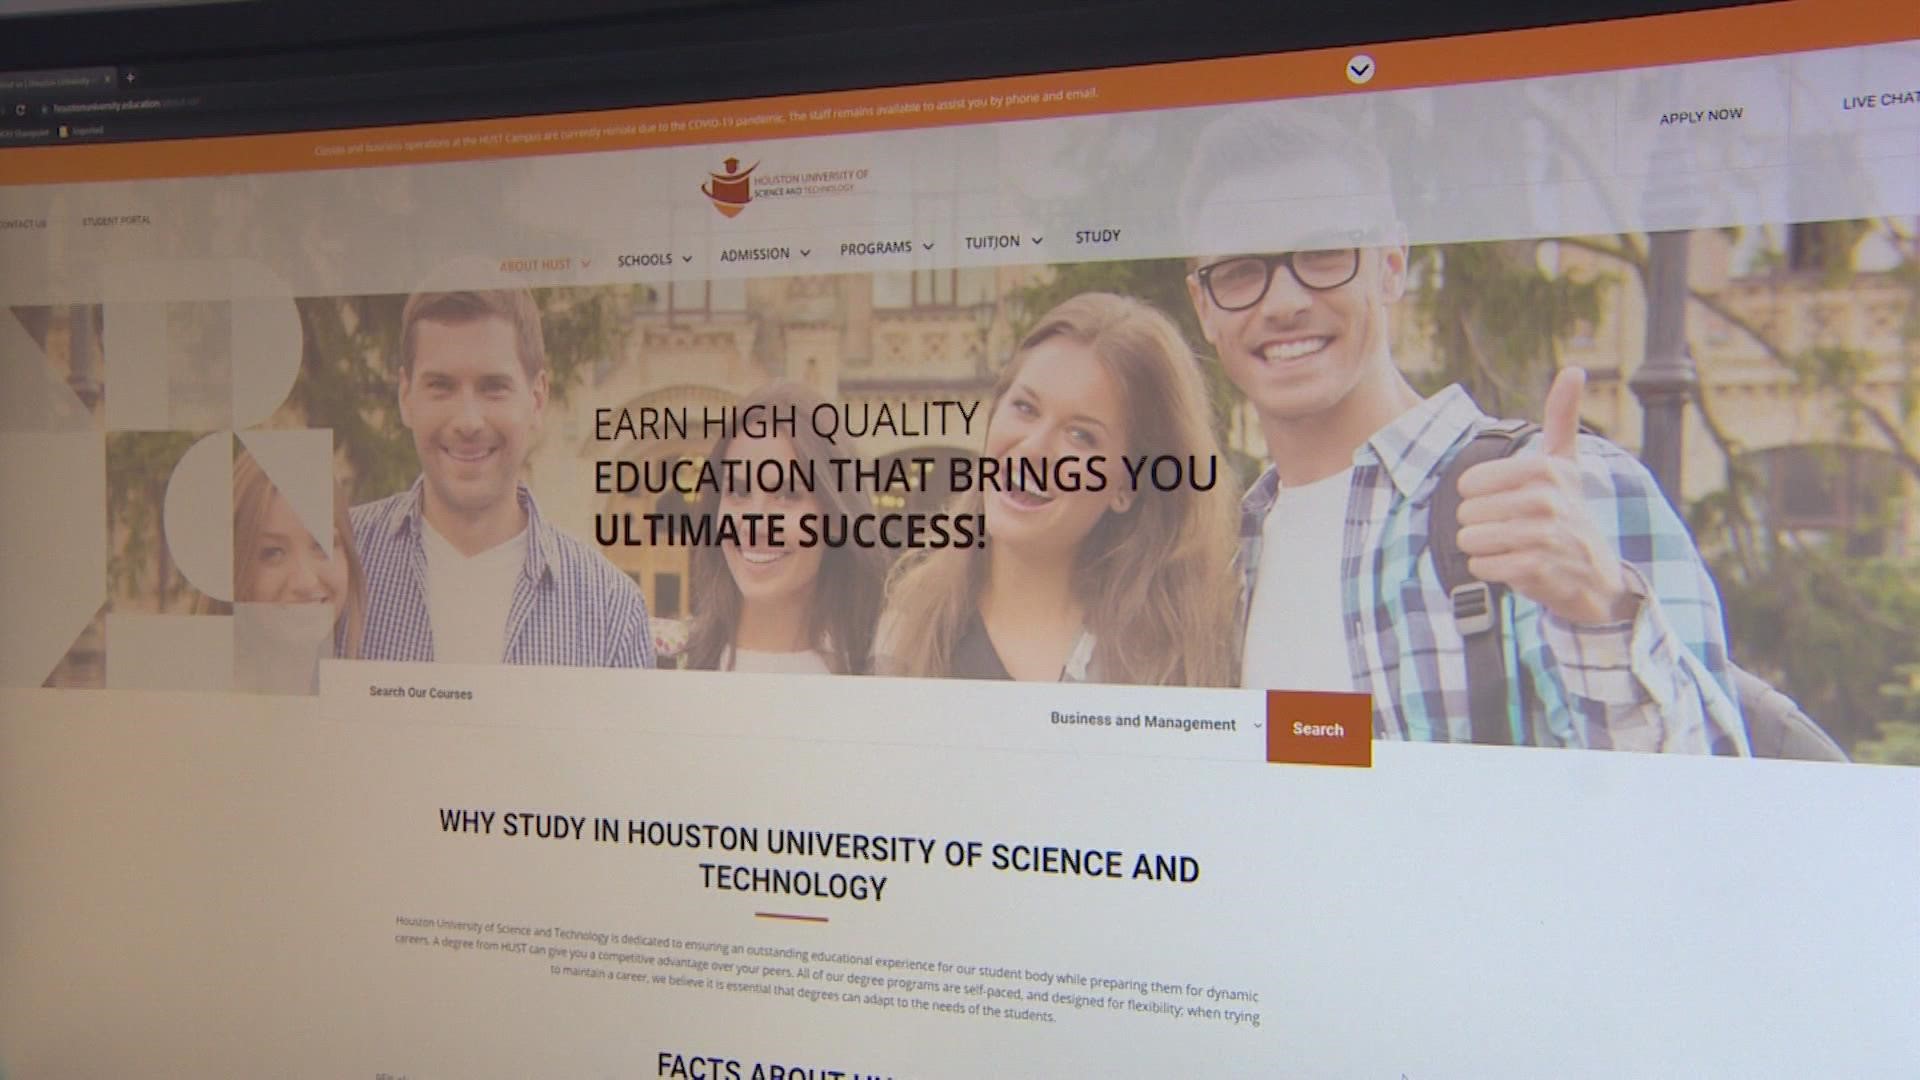 The online university website had a similar-sounding name to the University of Houston, but it's no longer up at all after a report by KHOU 11 Investigates.